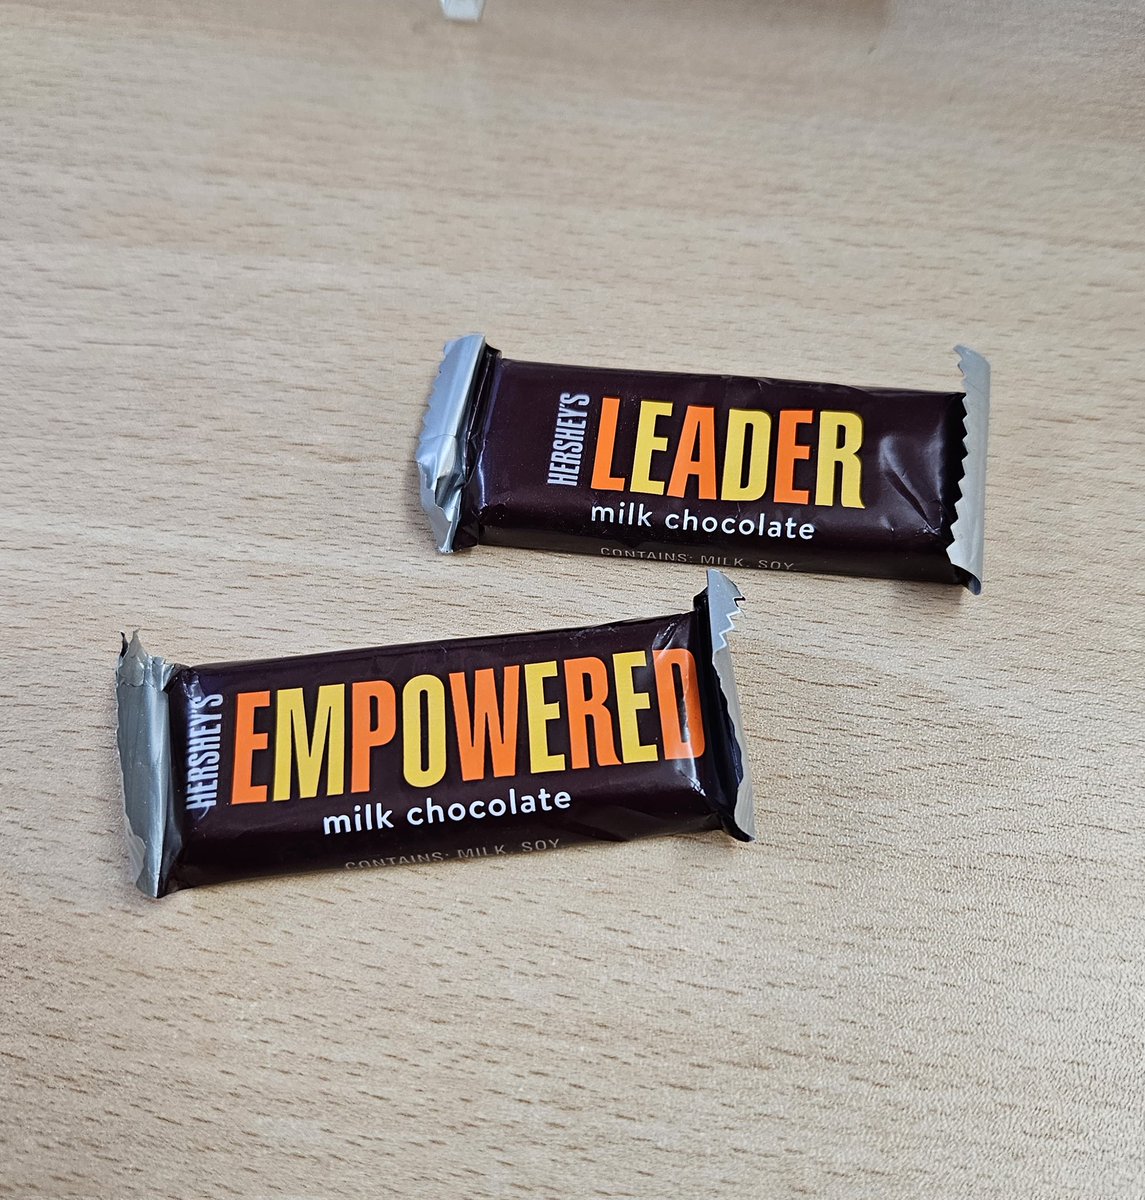 Found these on my desk this morning!
#randomactsofkindness
#leadership 
#nhsleaders
@CNWLPeople @Gillbobaggins1 @pughdavina 
@TheQNI 
@realjps
@allyjames29 @IPS_Infection